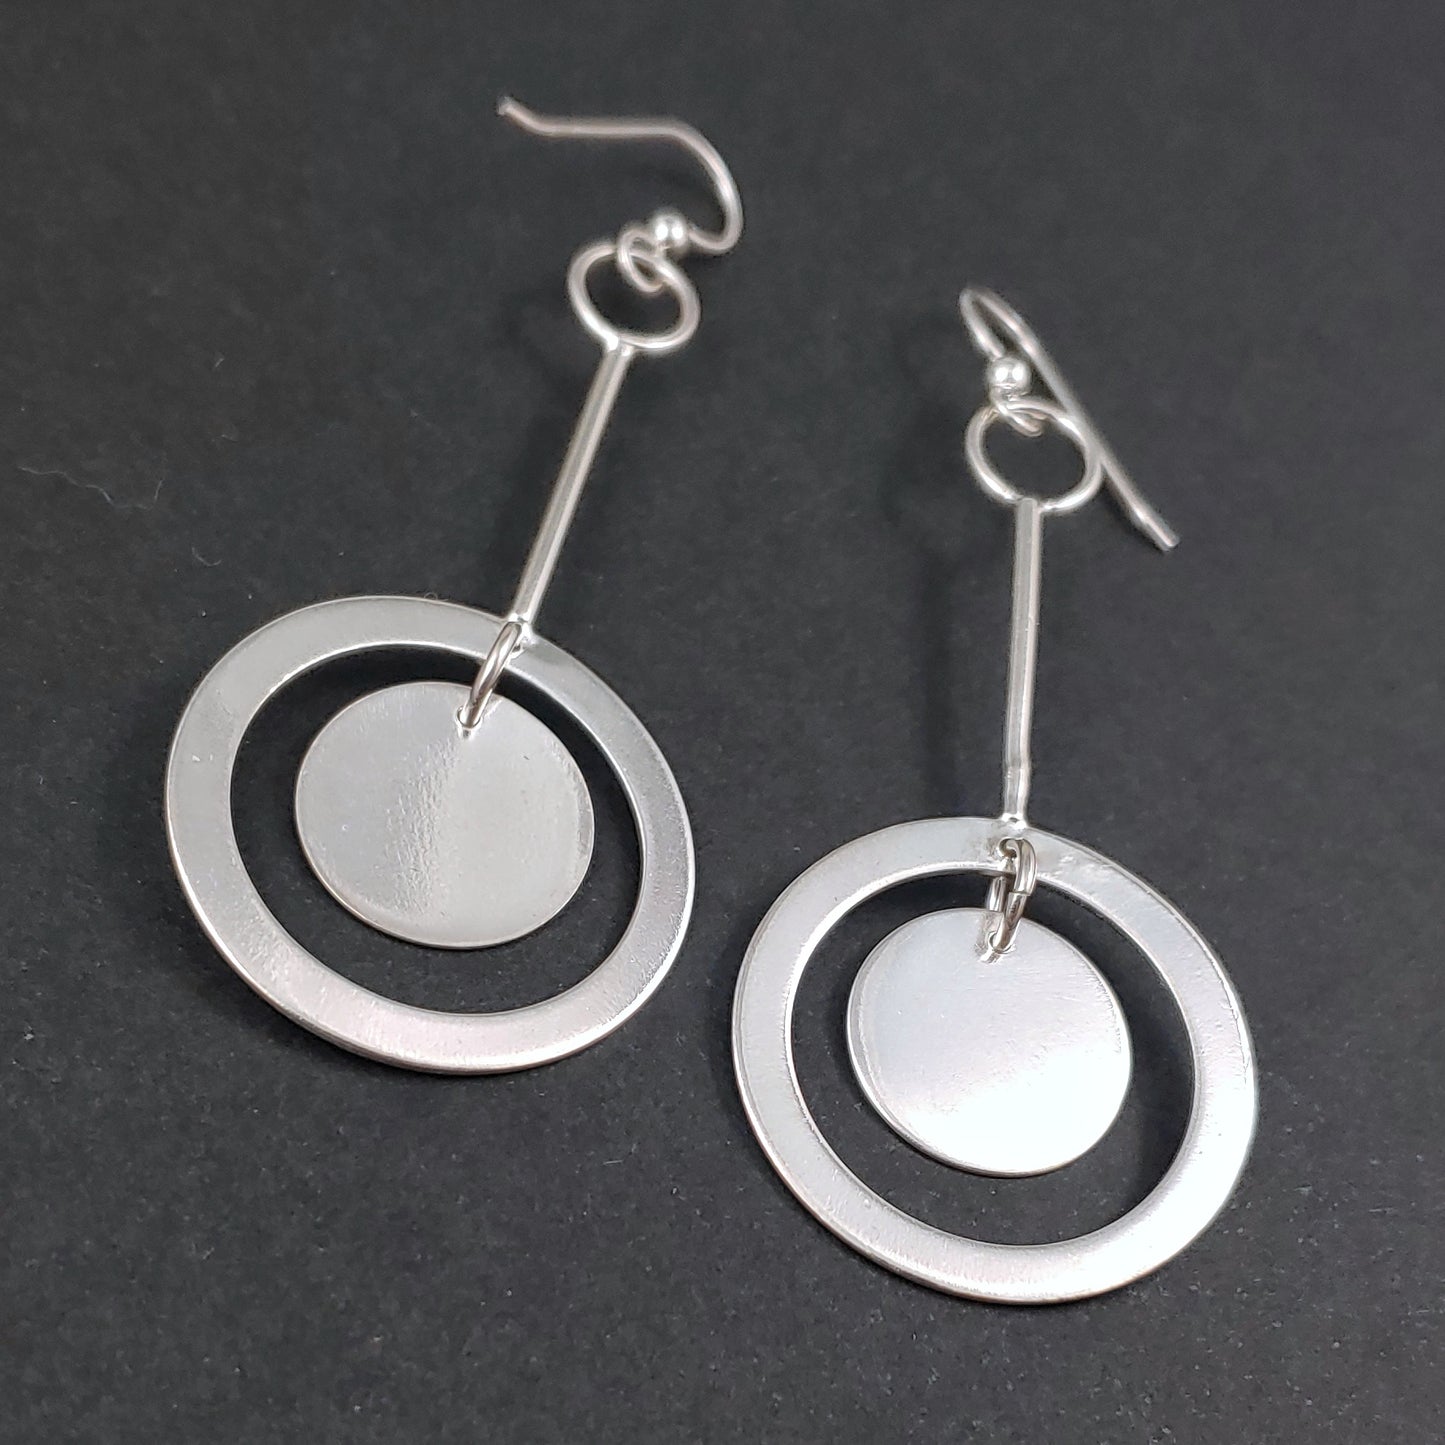 The Double Round Earrings - Sterling Silver